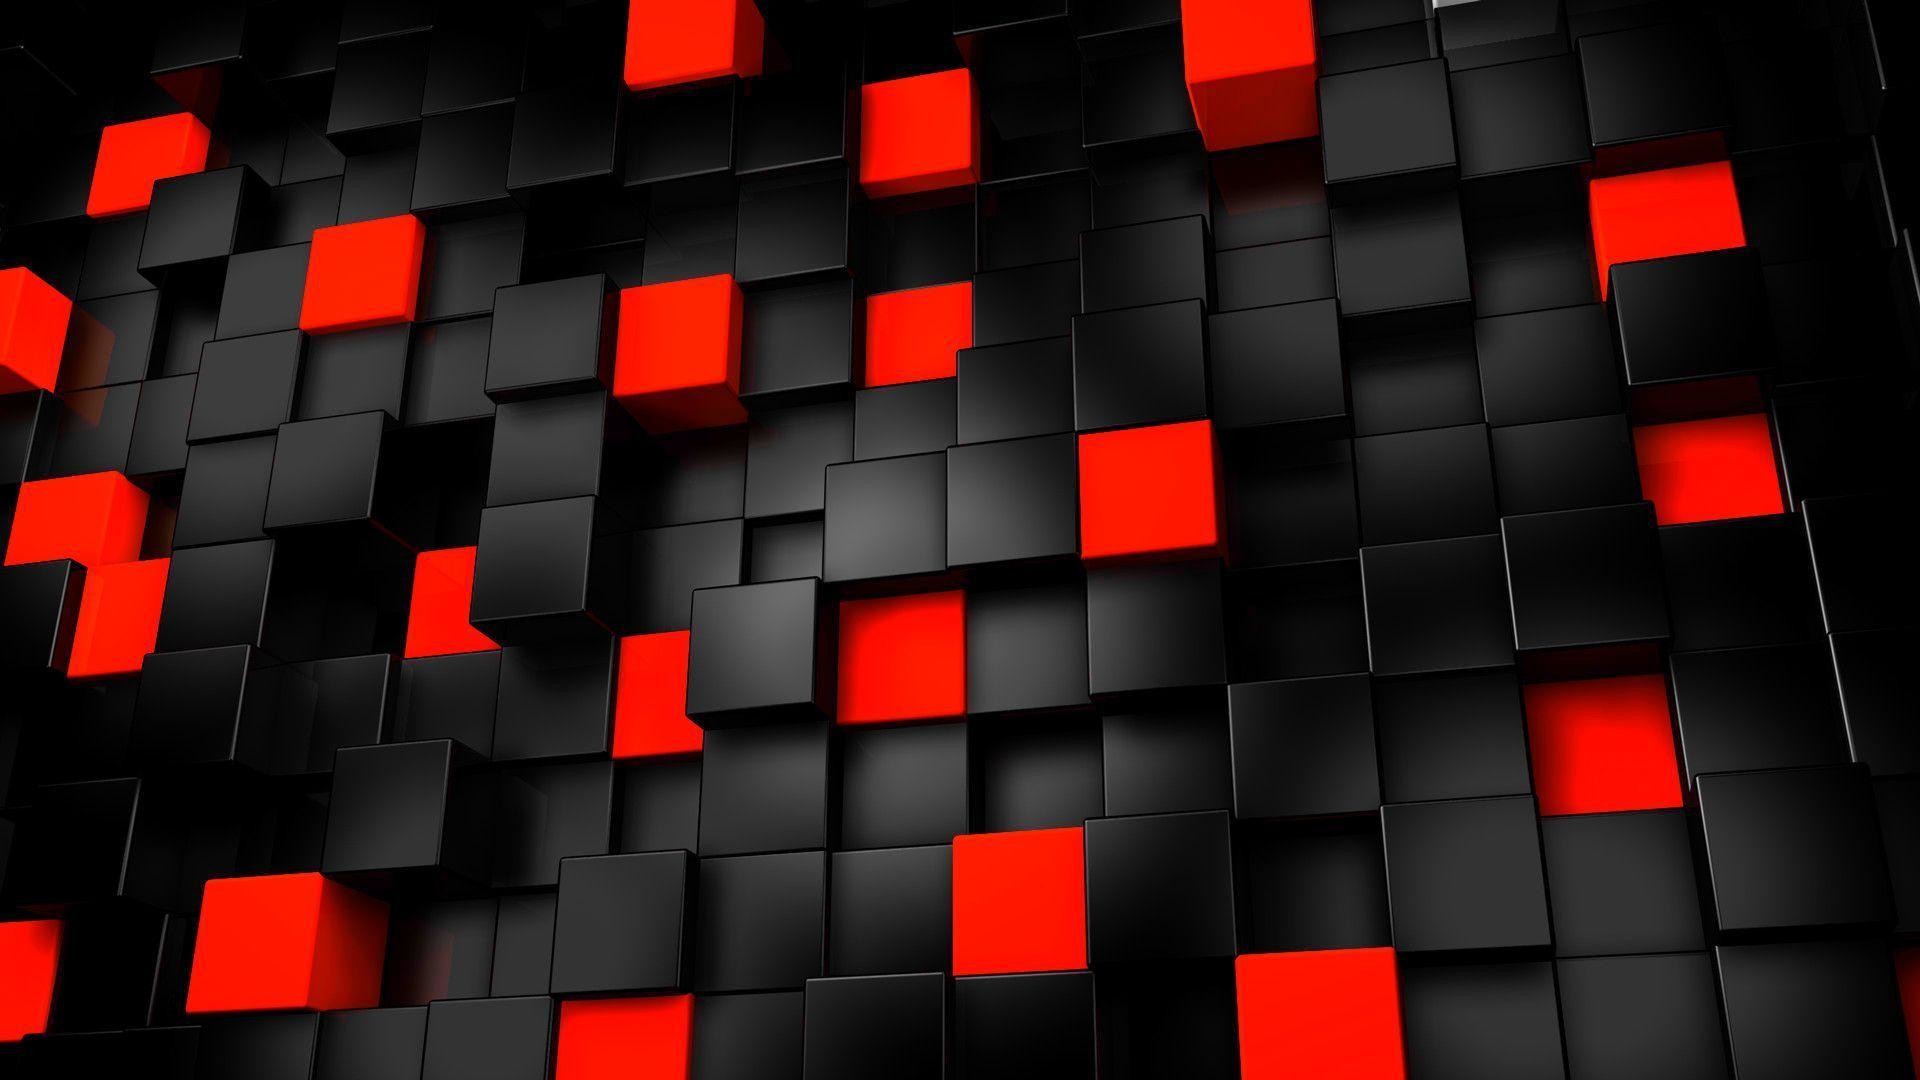 1920x1080 Wallpapers For > Black And Red Wallpaper Abstract